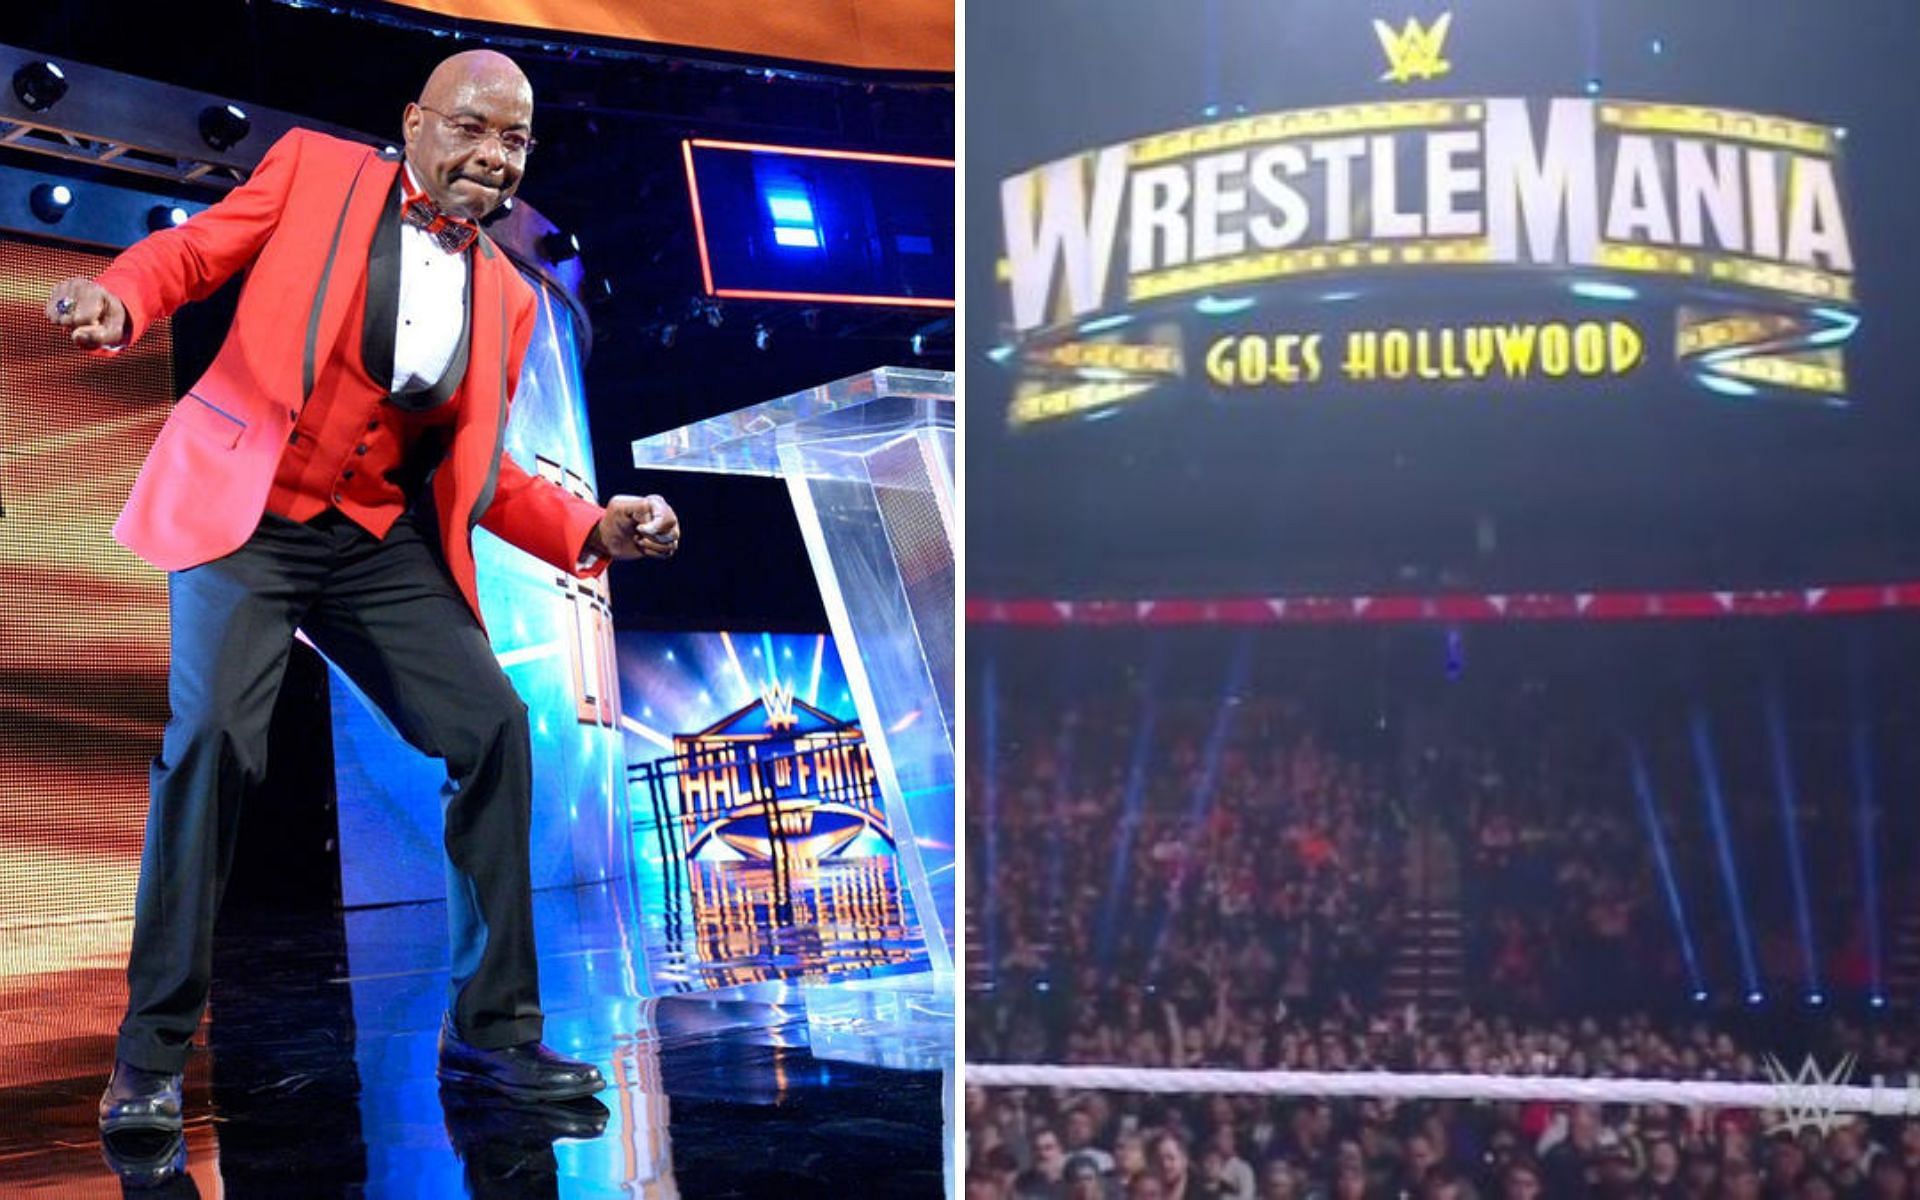 Teddy Long says legendary 15-time Champion could be assaulted at WWE Hall of Fame ceremony this year (Exclusive)